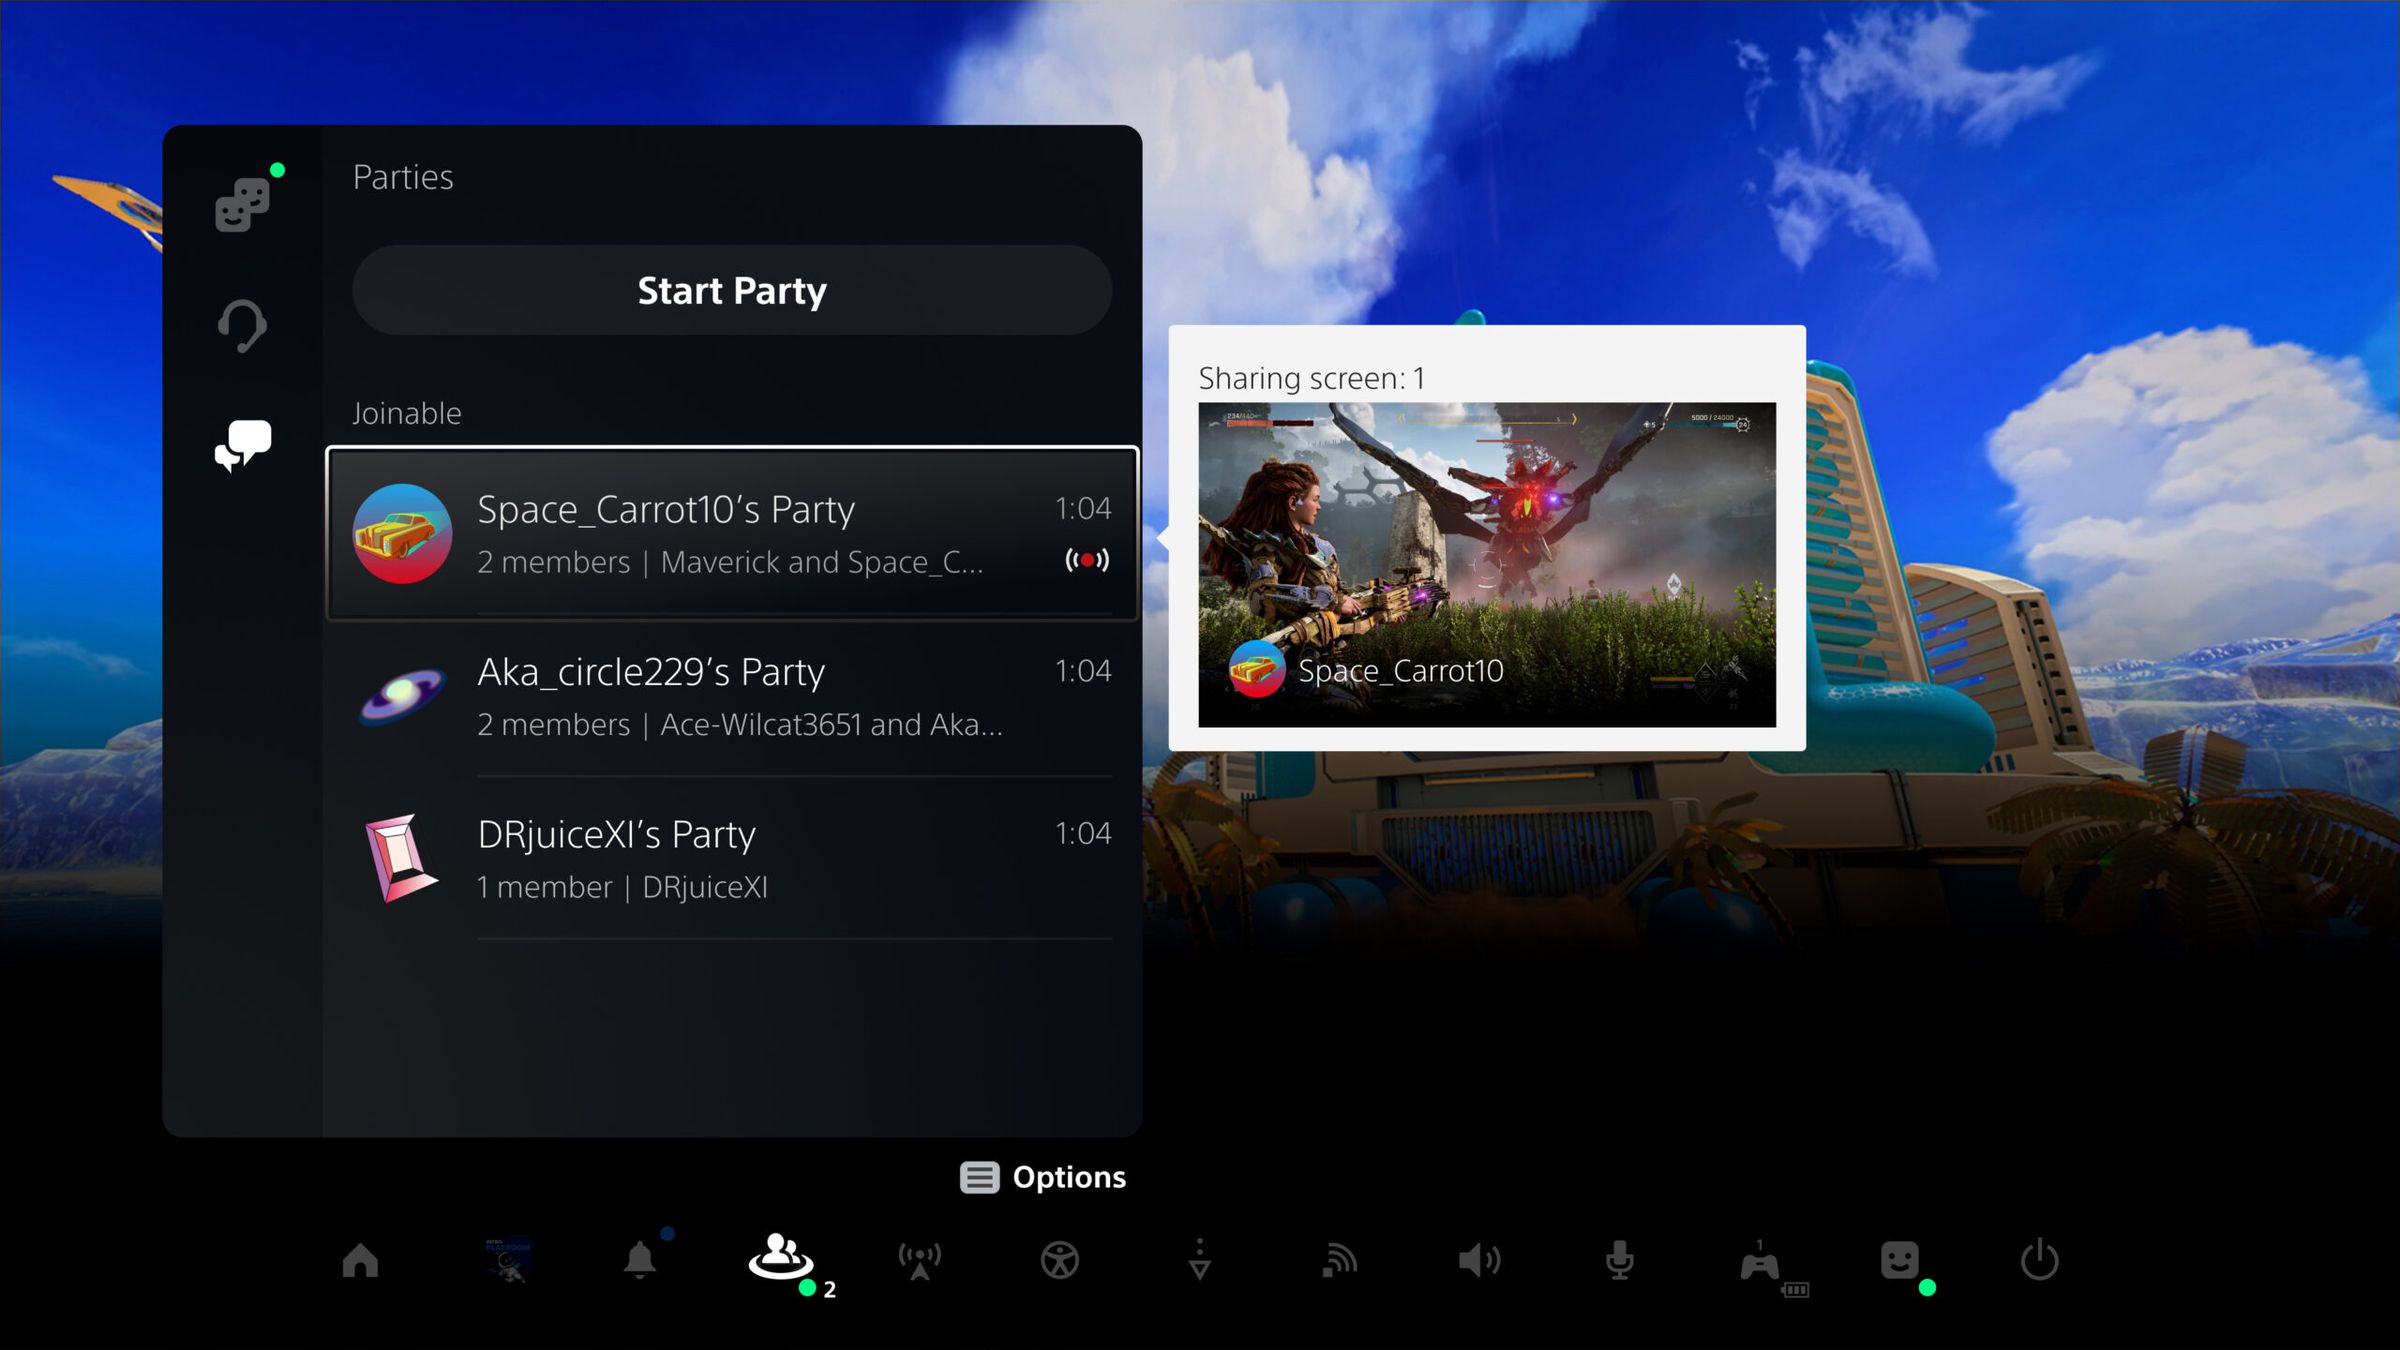 You can now see a preview of someone’s screen share before you join a party.